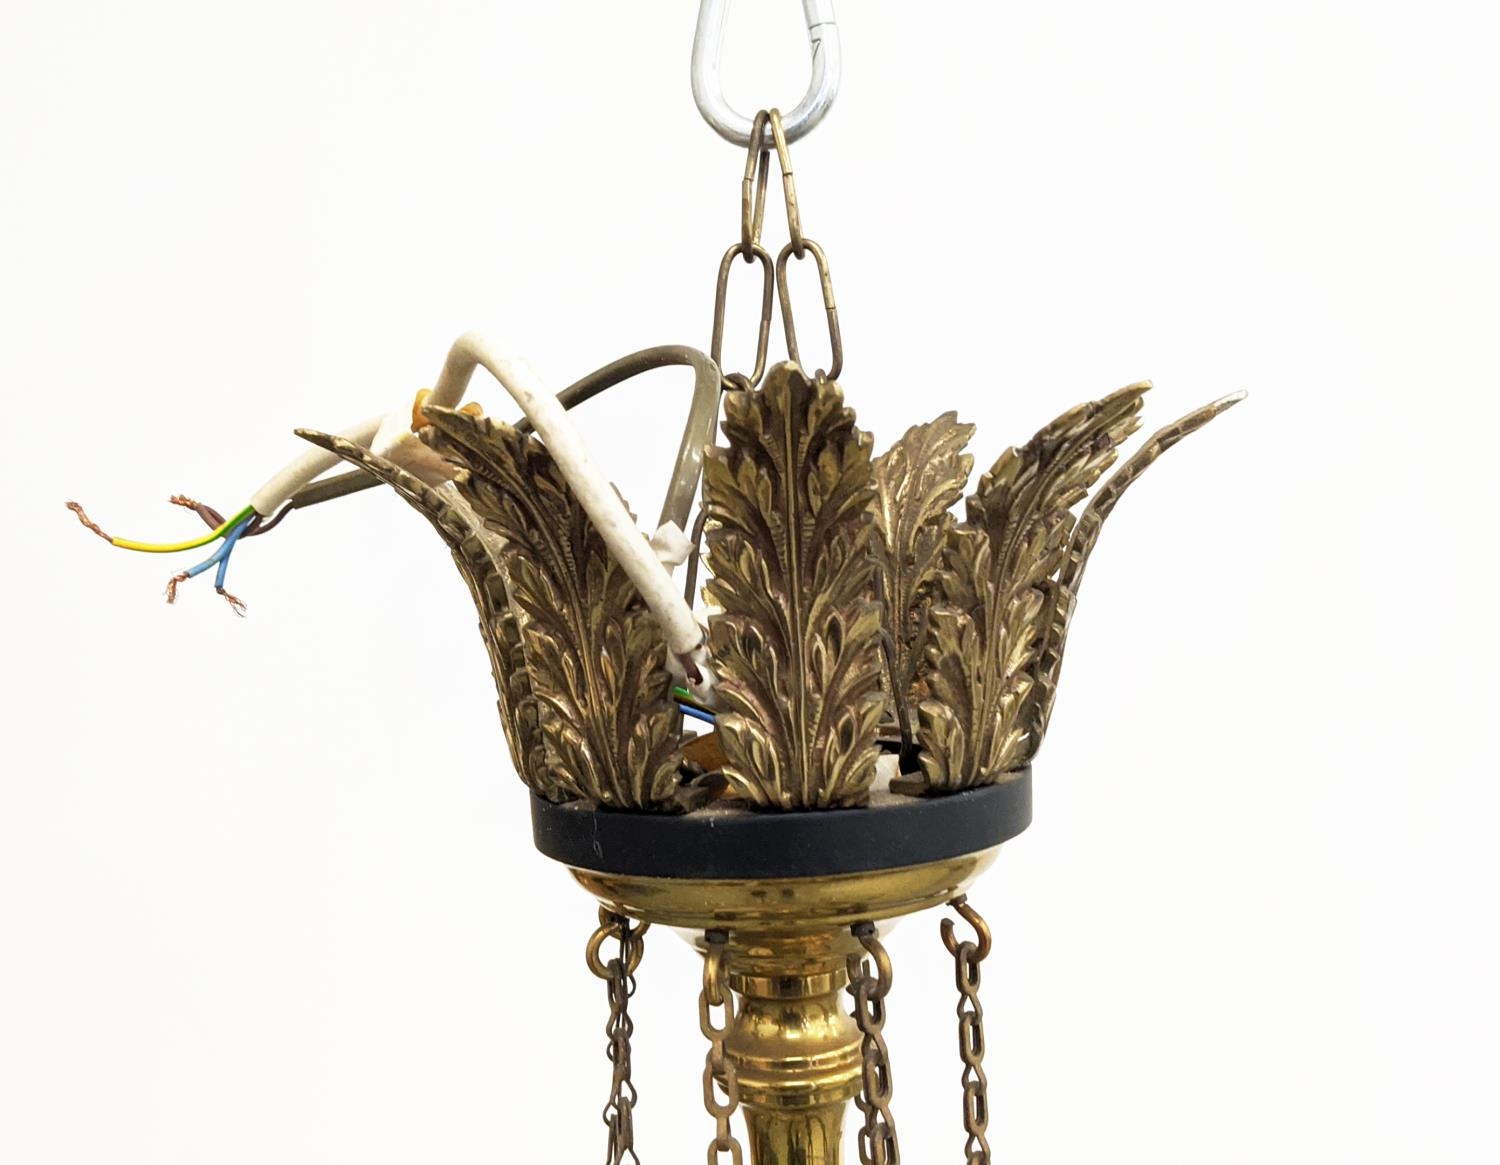 CEILING LIGHT EMPIRE STYLE, black metal and brass with acanthus leaf detail, 77cm W x 96cm H approx. - Image 6 of 14